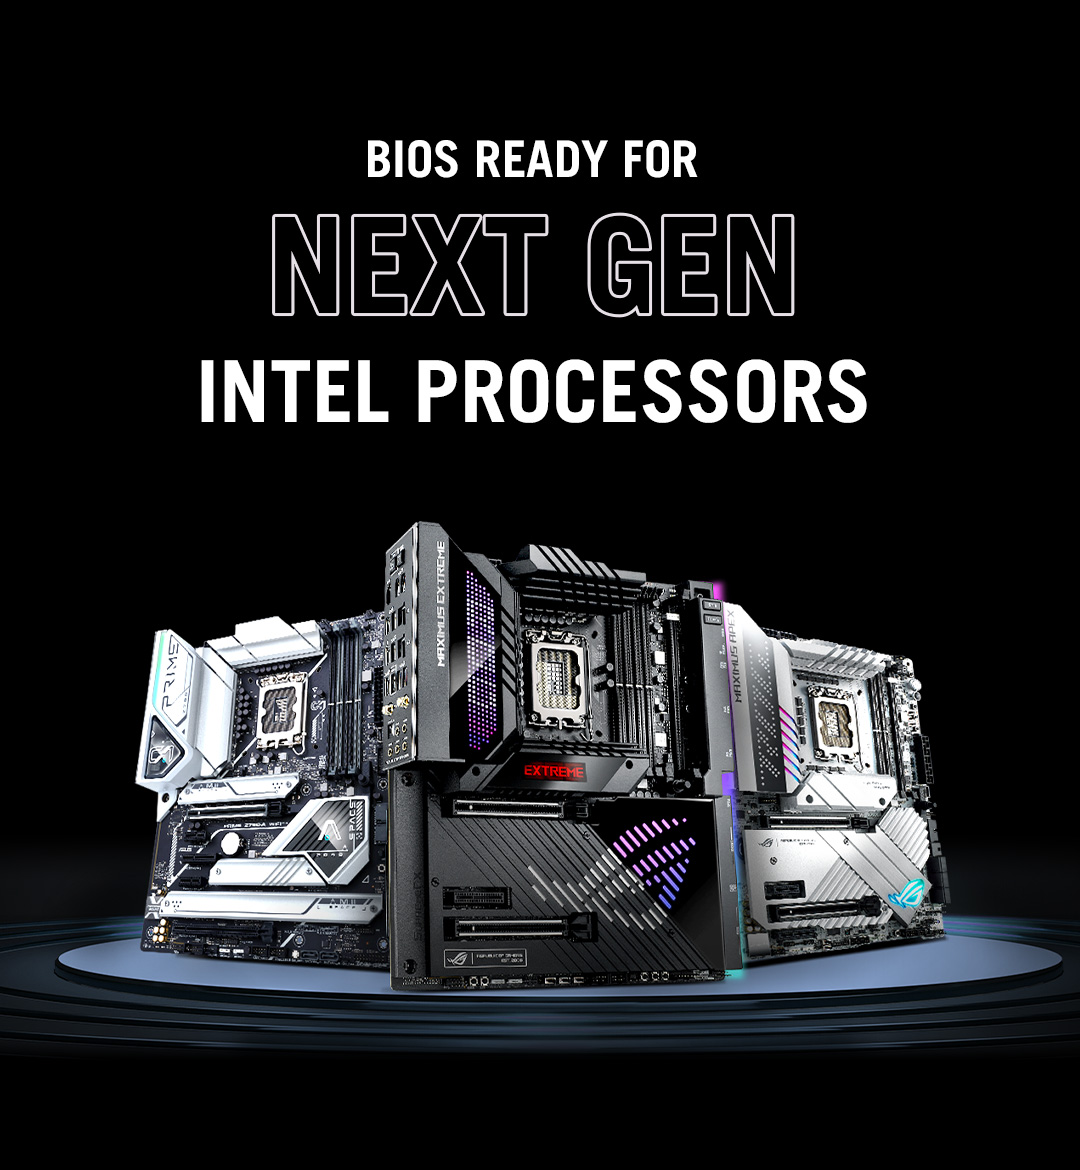 Three Z790 motherboards image with BIOS Ready for next-gen Intel Processors